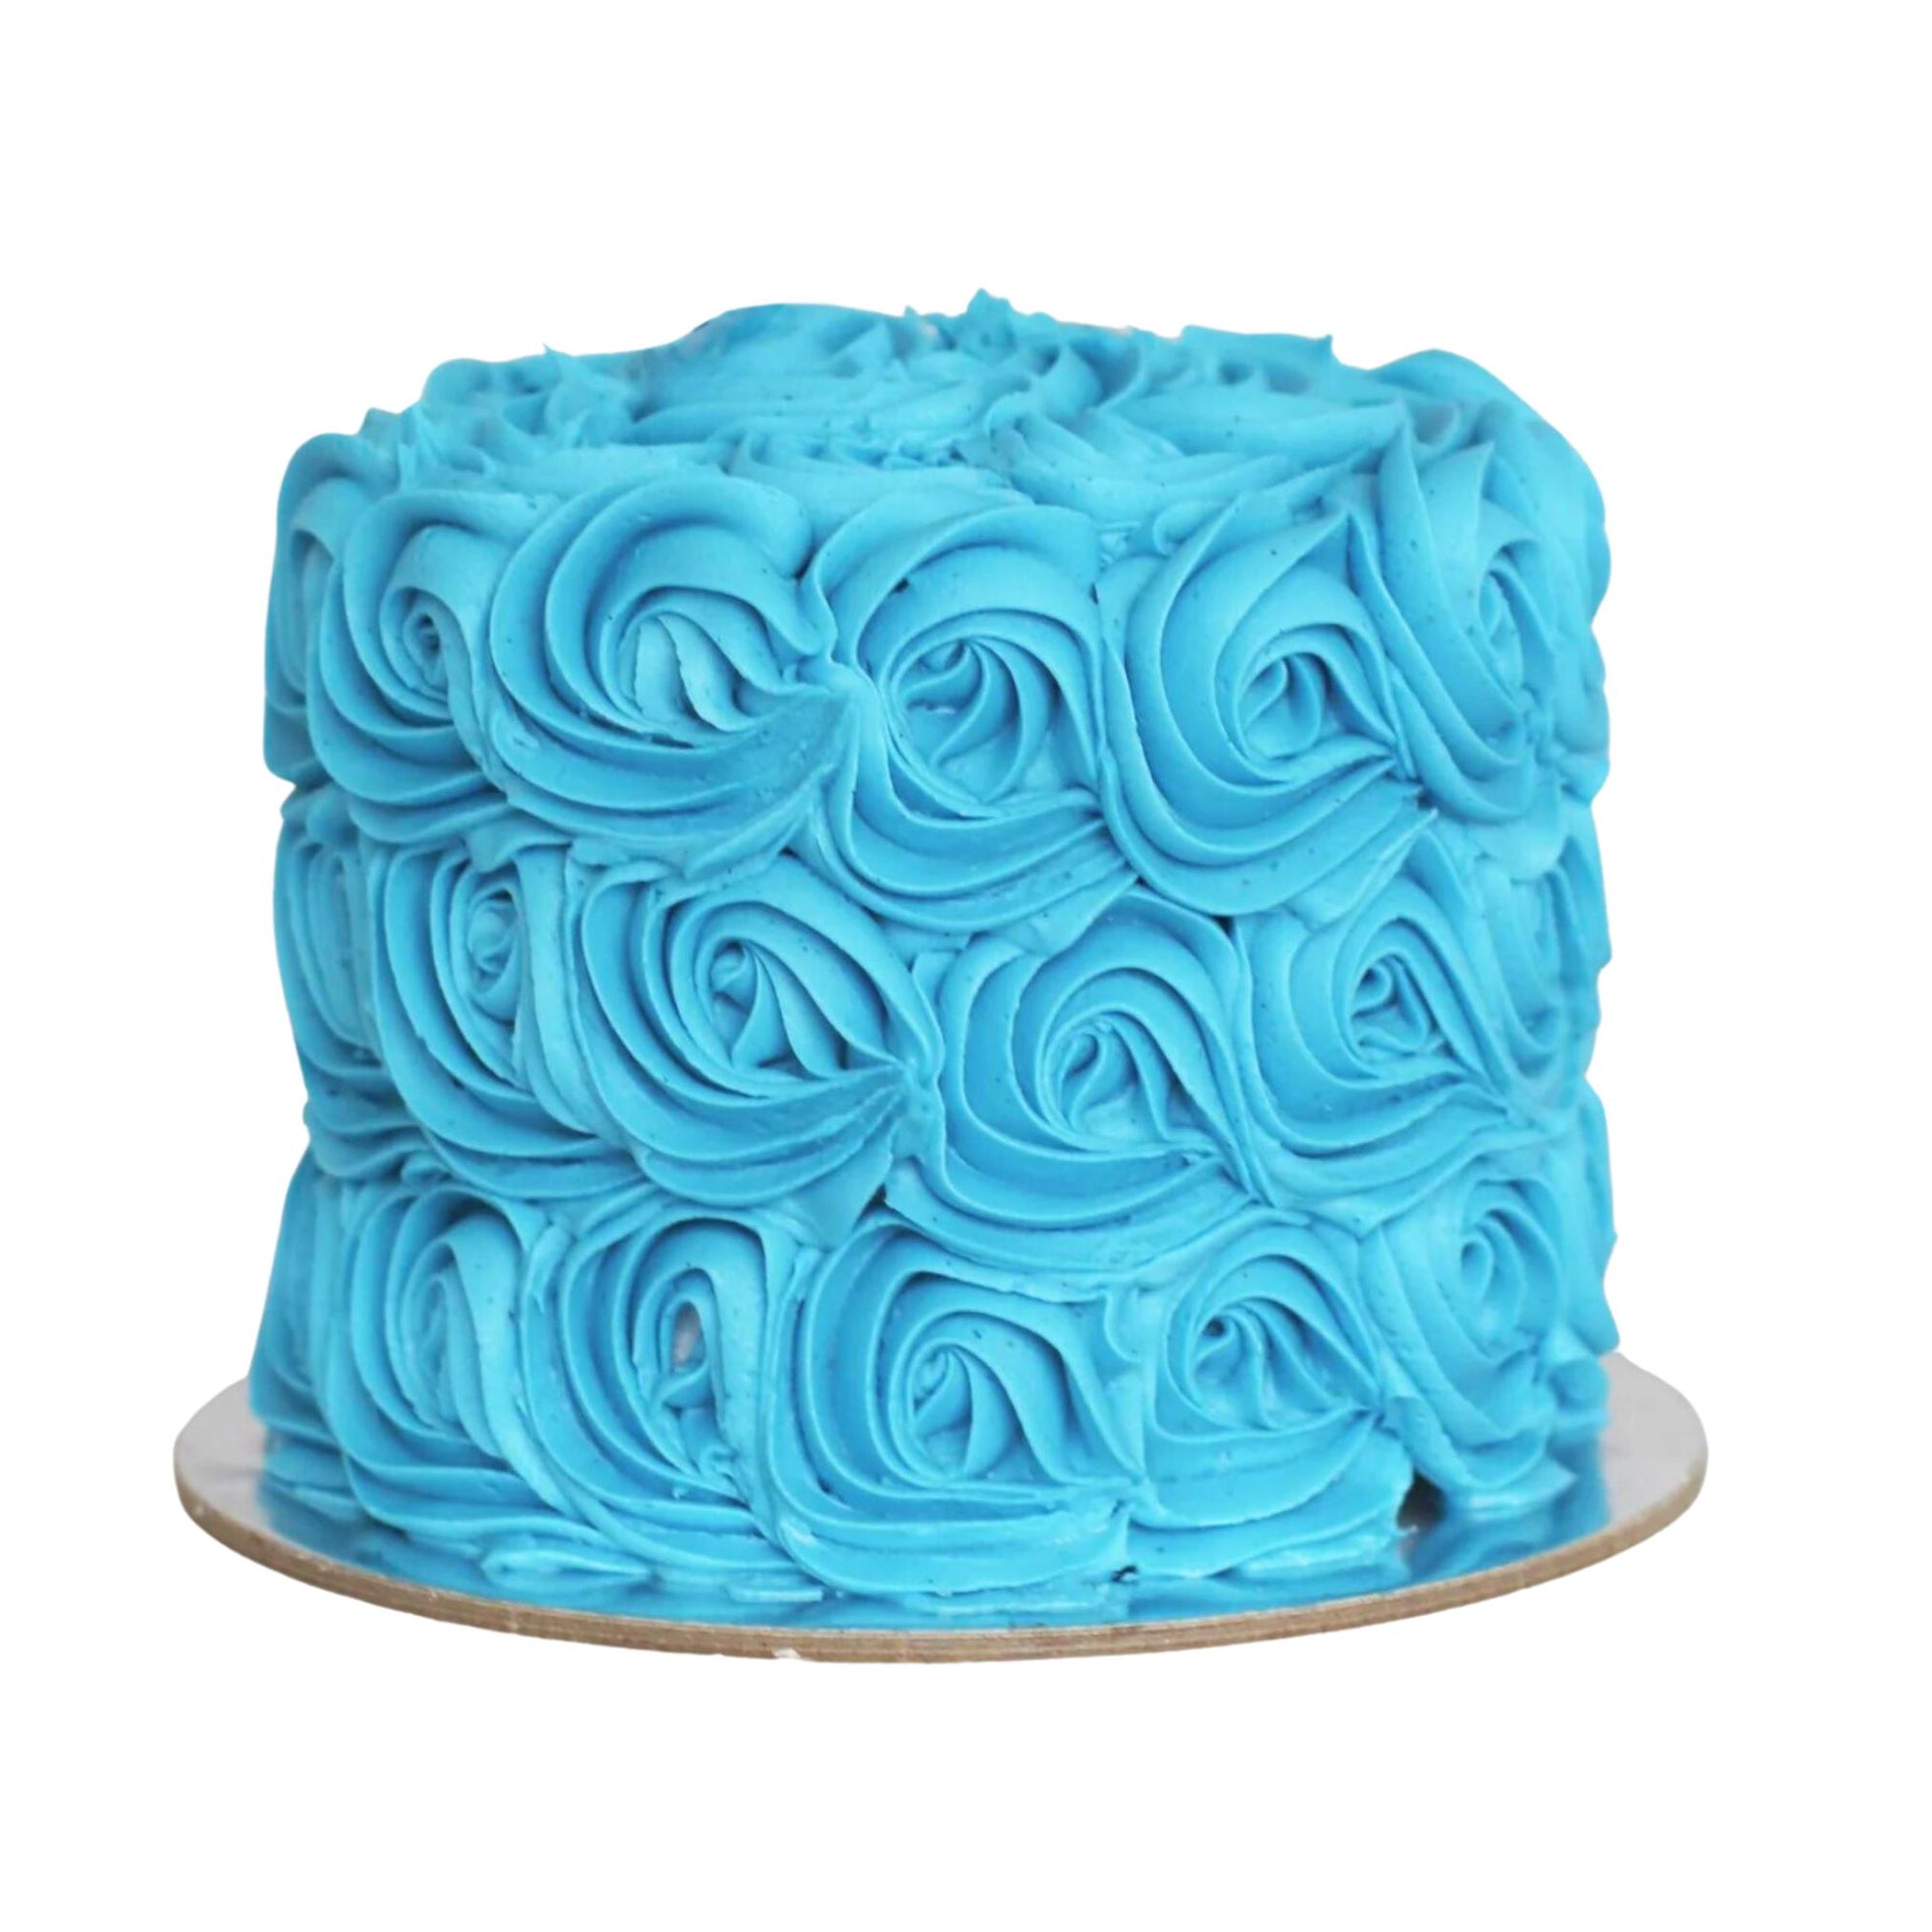 Blue Swirl Cake Cakes The Cupcake Queens 